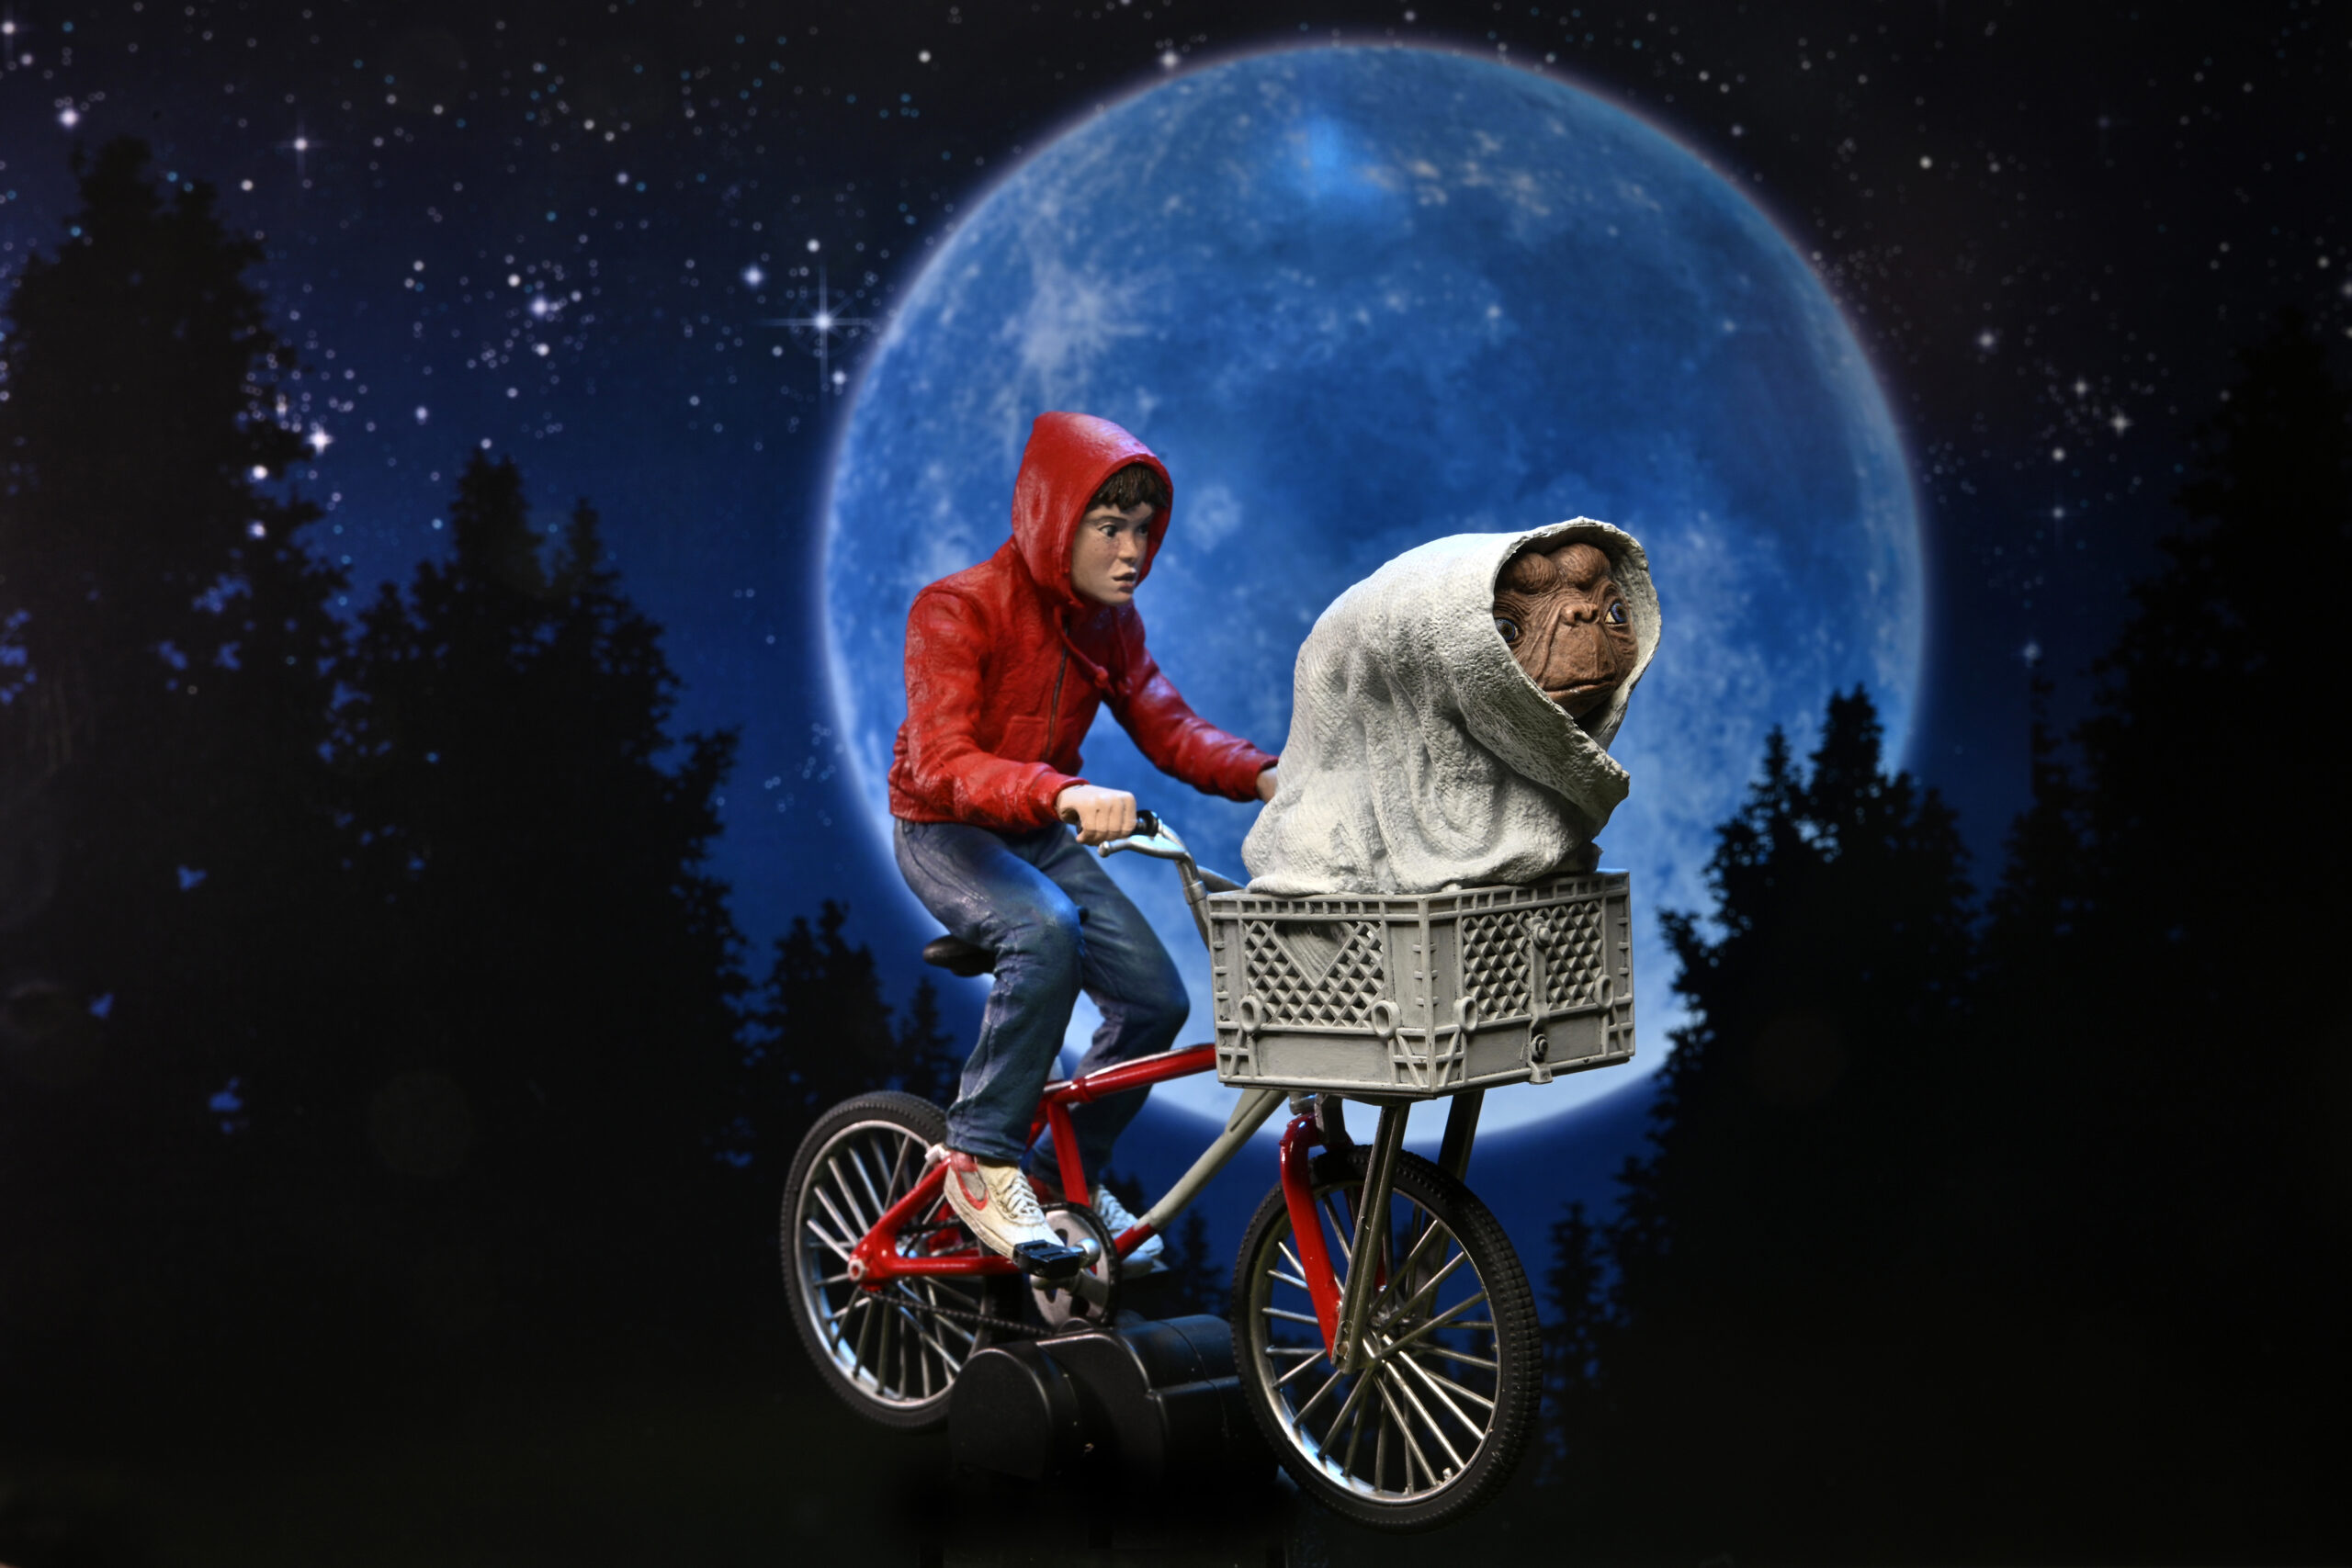  NECA - E.T. the Extra-Terrestrial - 7 scale action